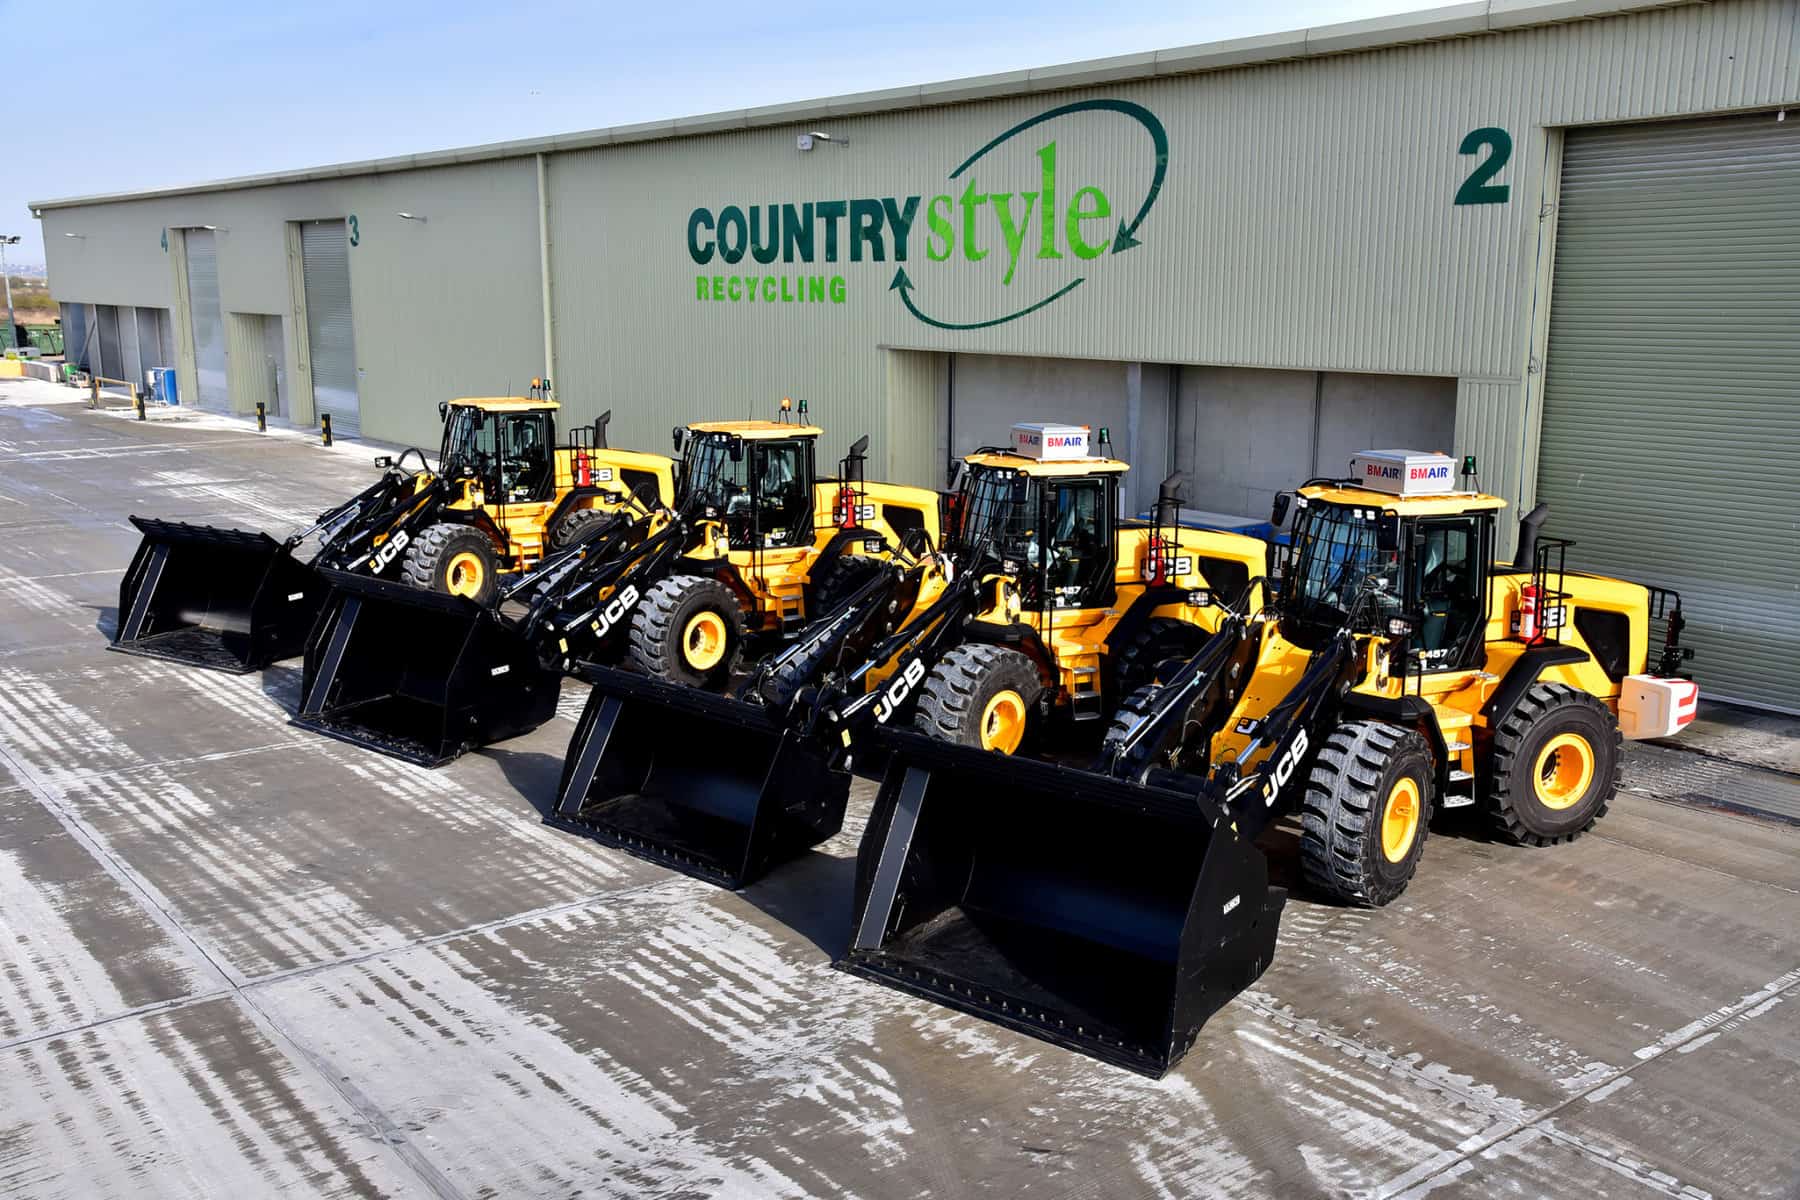 Four brand new JCB 457 Wheel Loaders acquired for our Ridham Facility